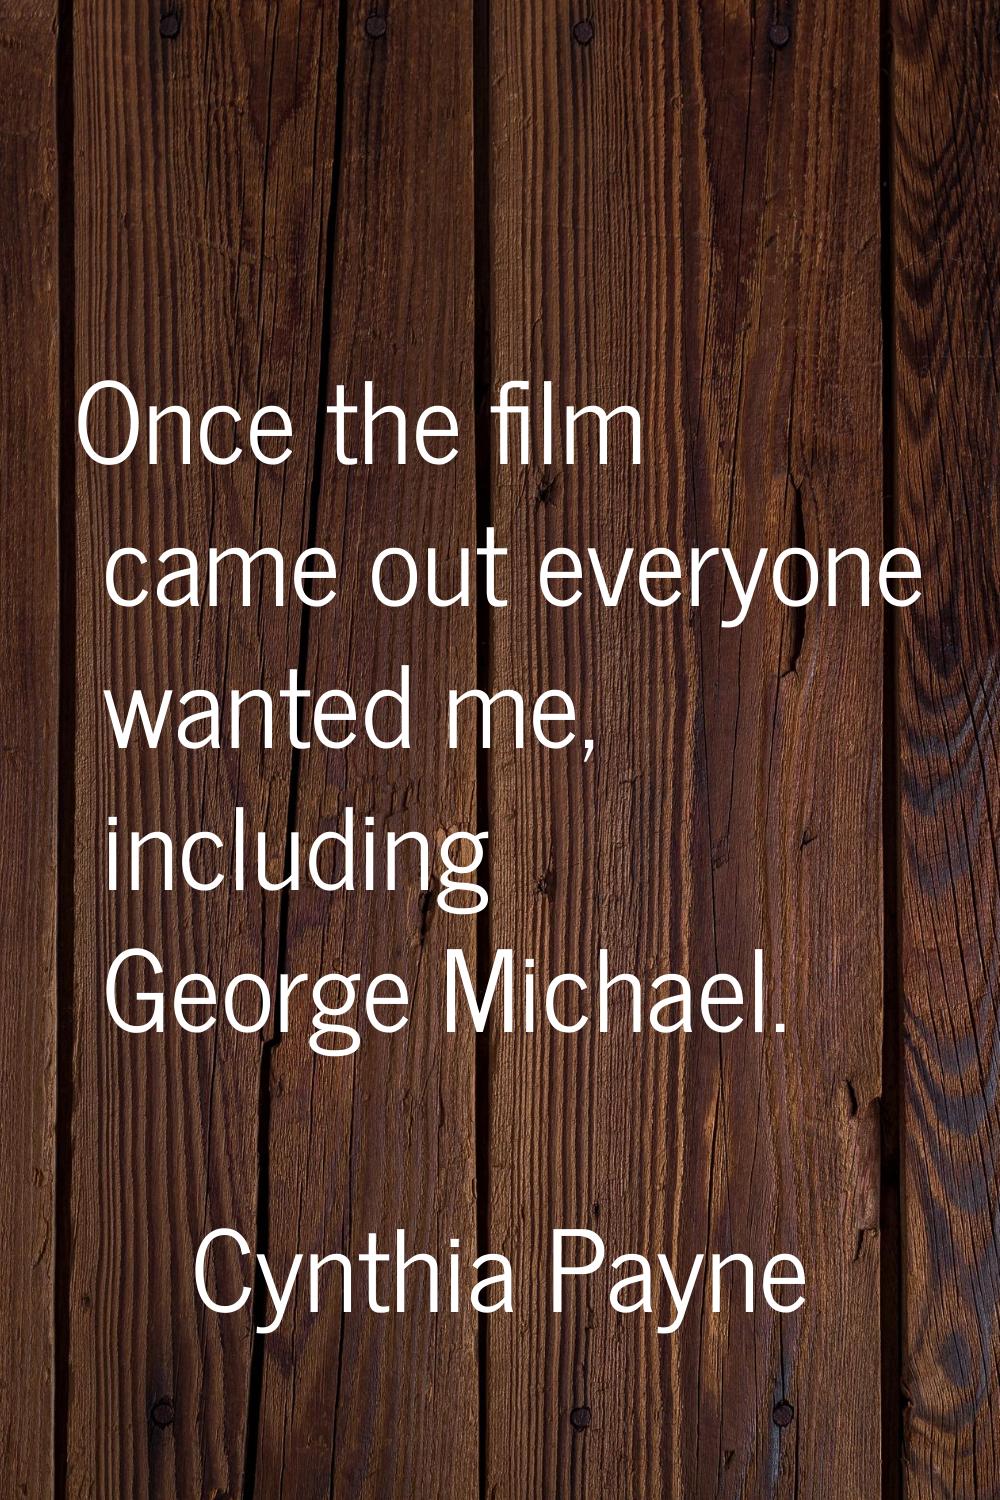 Once the film came out everyone wanted me, including George Michael.